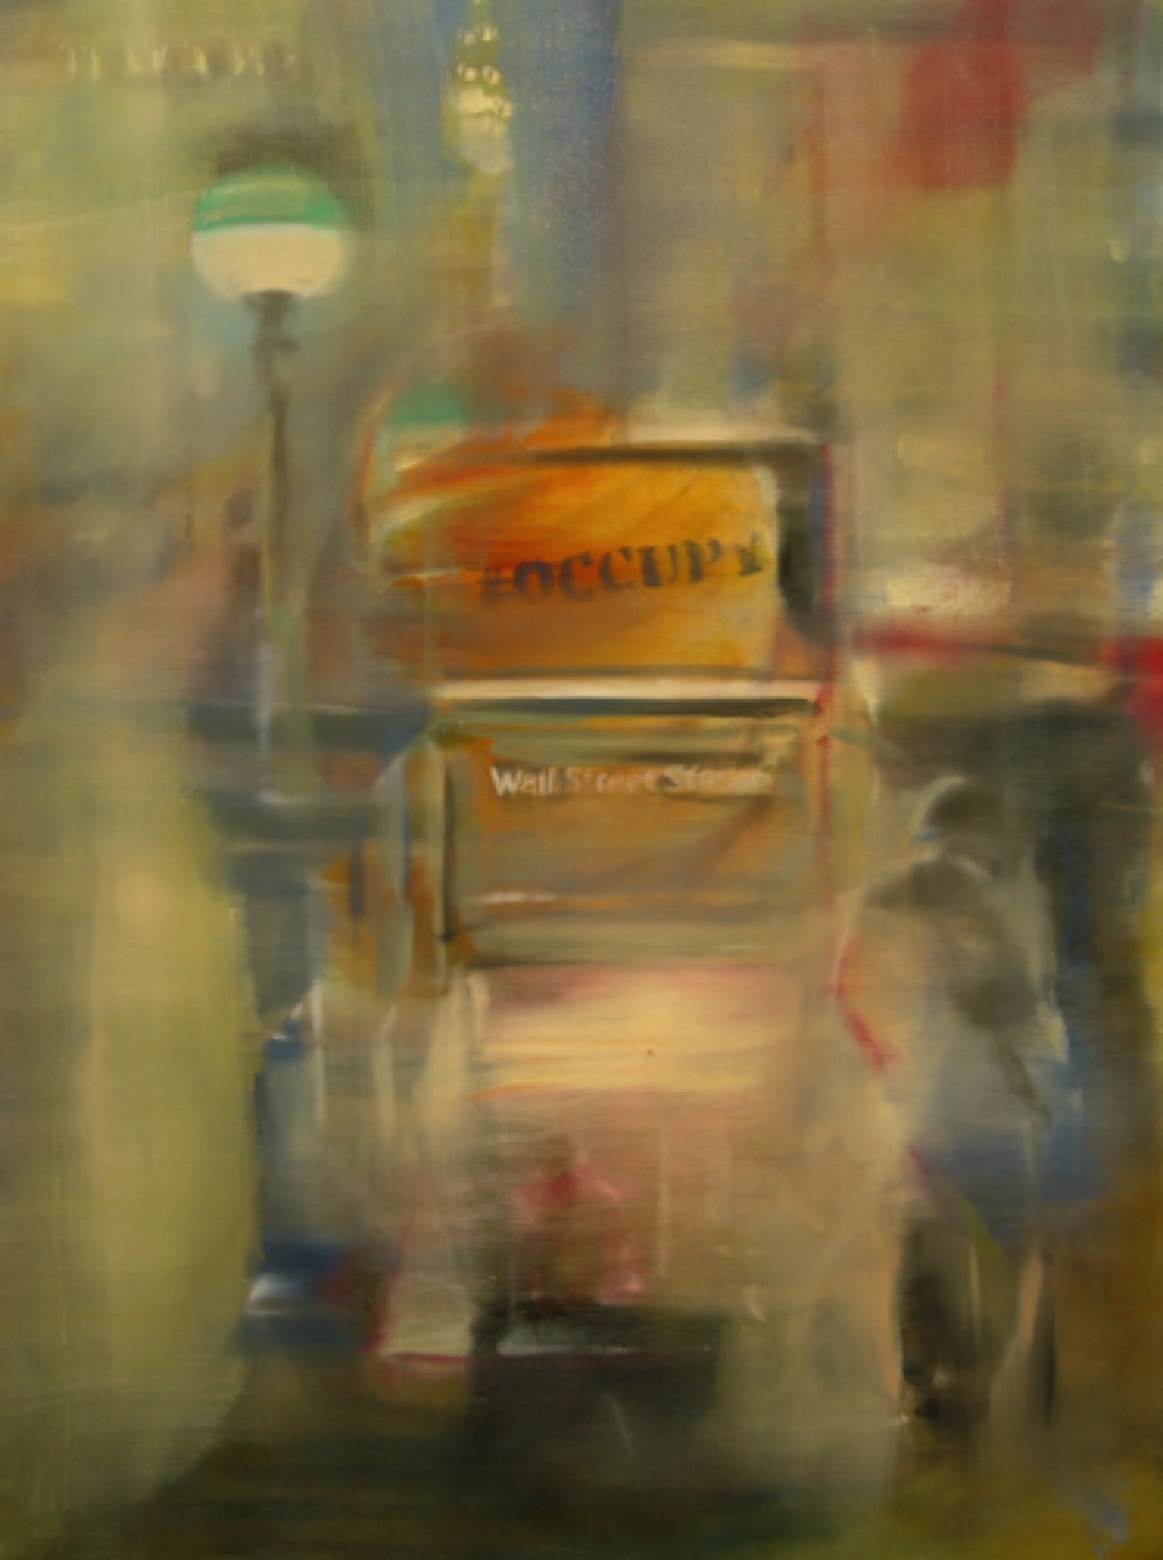 Gregg Chadwick
Occupy
40"x30"oil on linen 2012
Angela Hudson Collection, Los Angeles, California